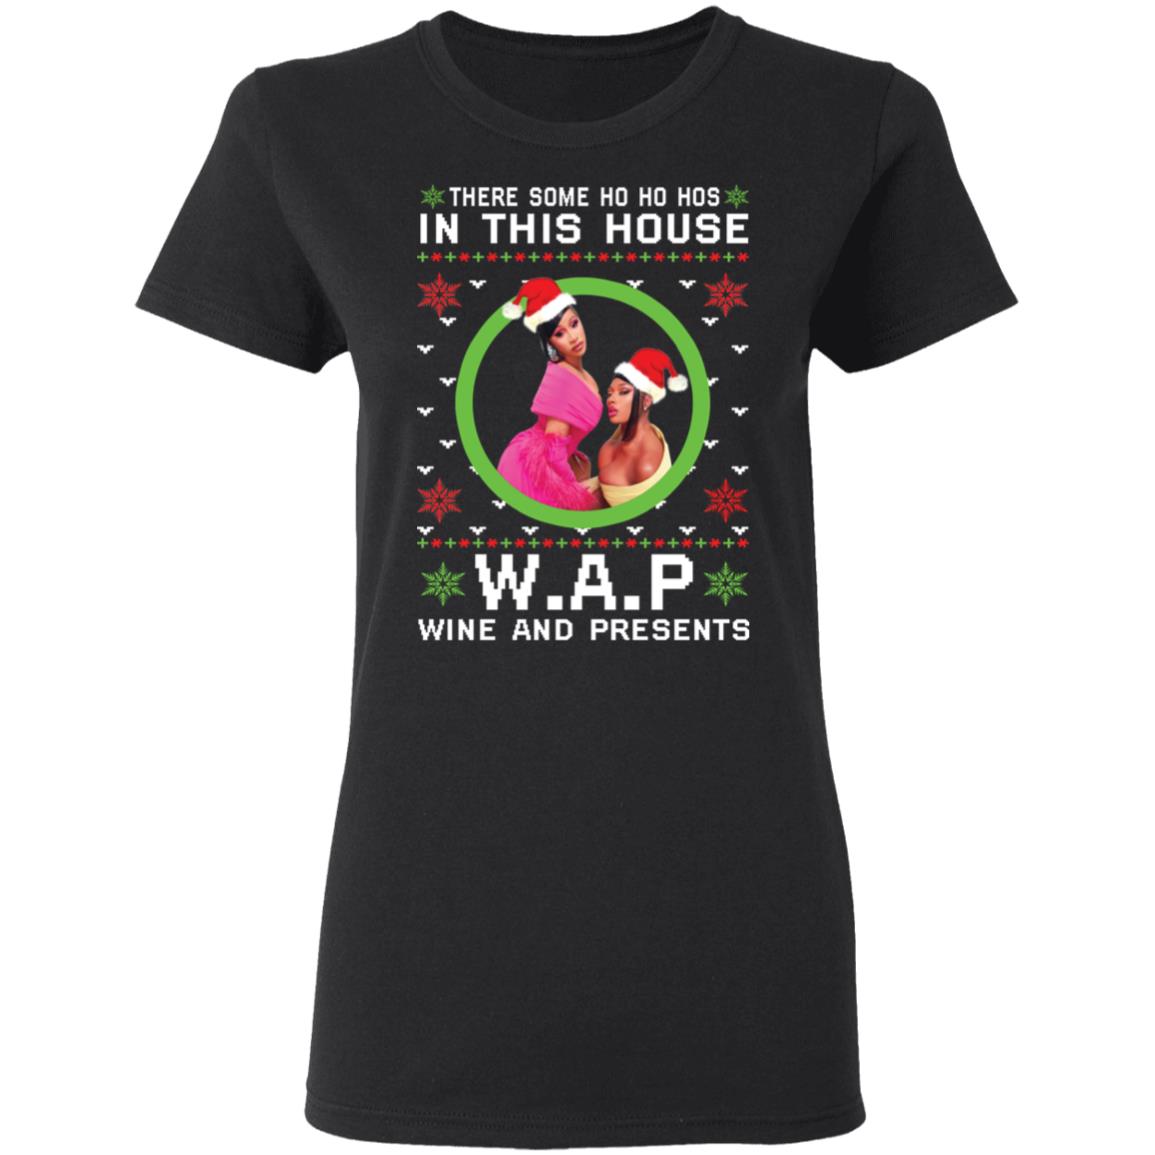 There some Ho Ho Hos in this house wap wine and presents Christmas sweatshirt, t-shirt